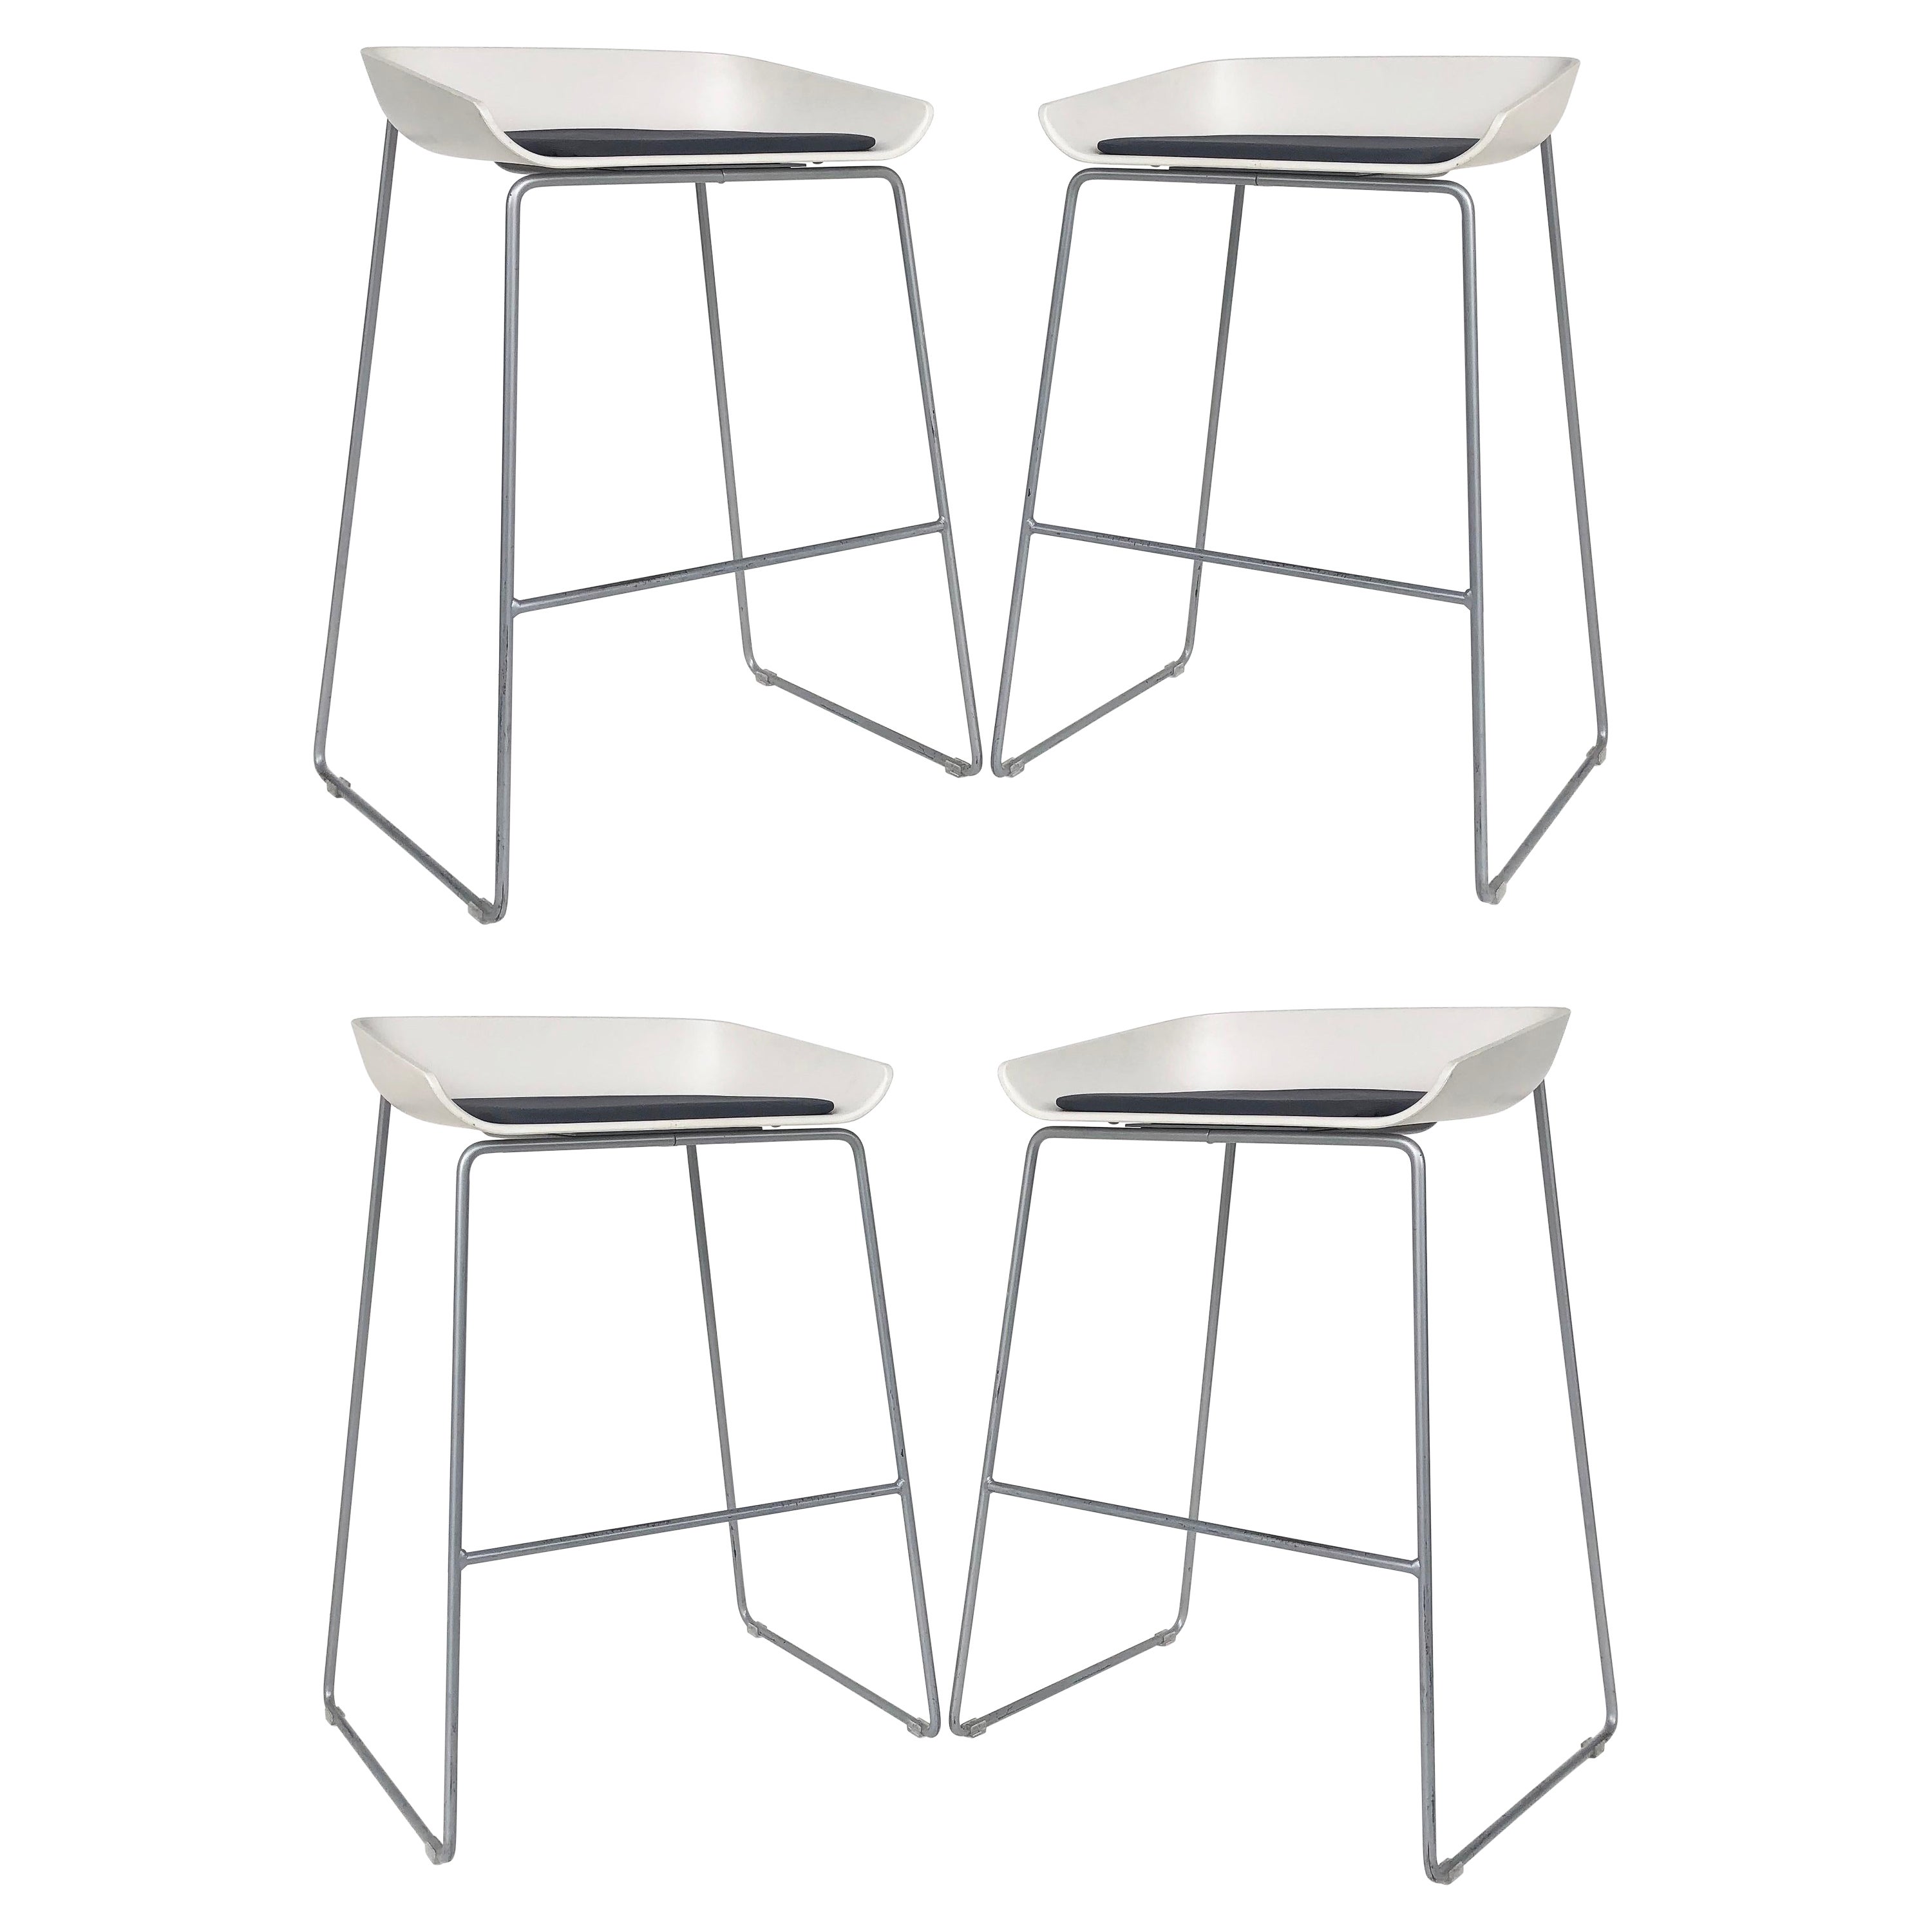 Turnstone Scoop Bar Stools for Steelcase Furniture, Set of Four